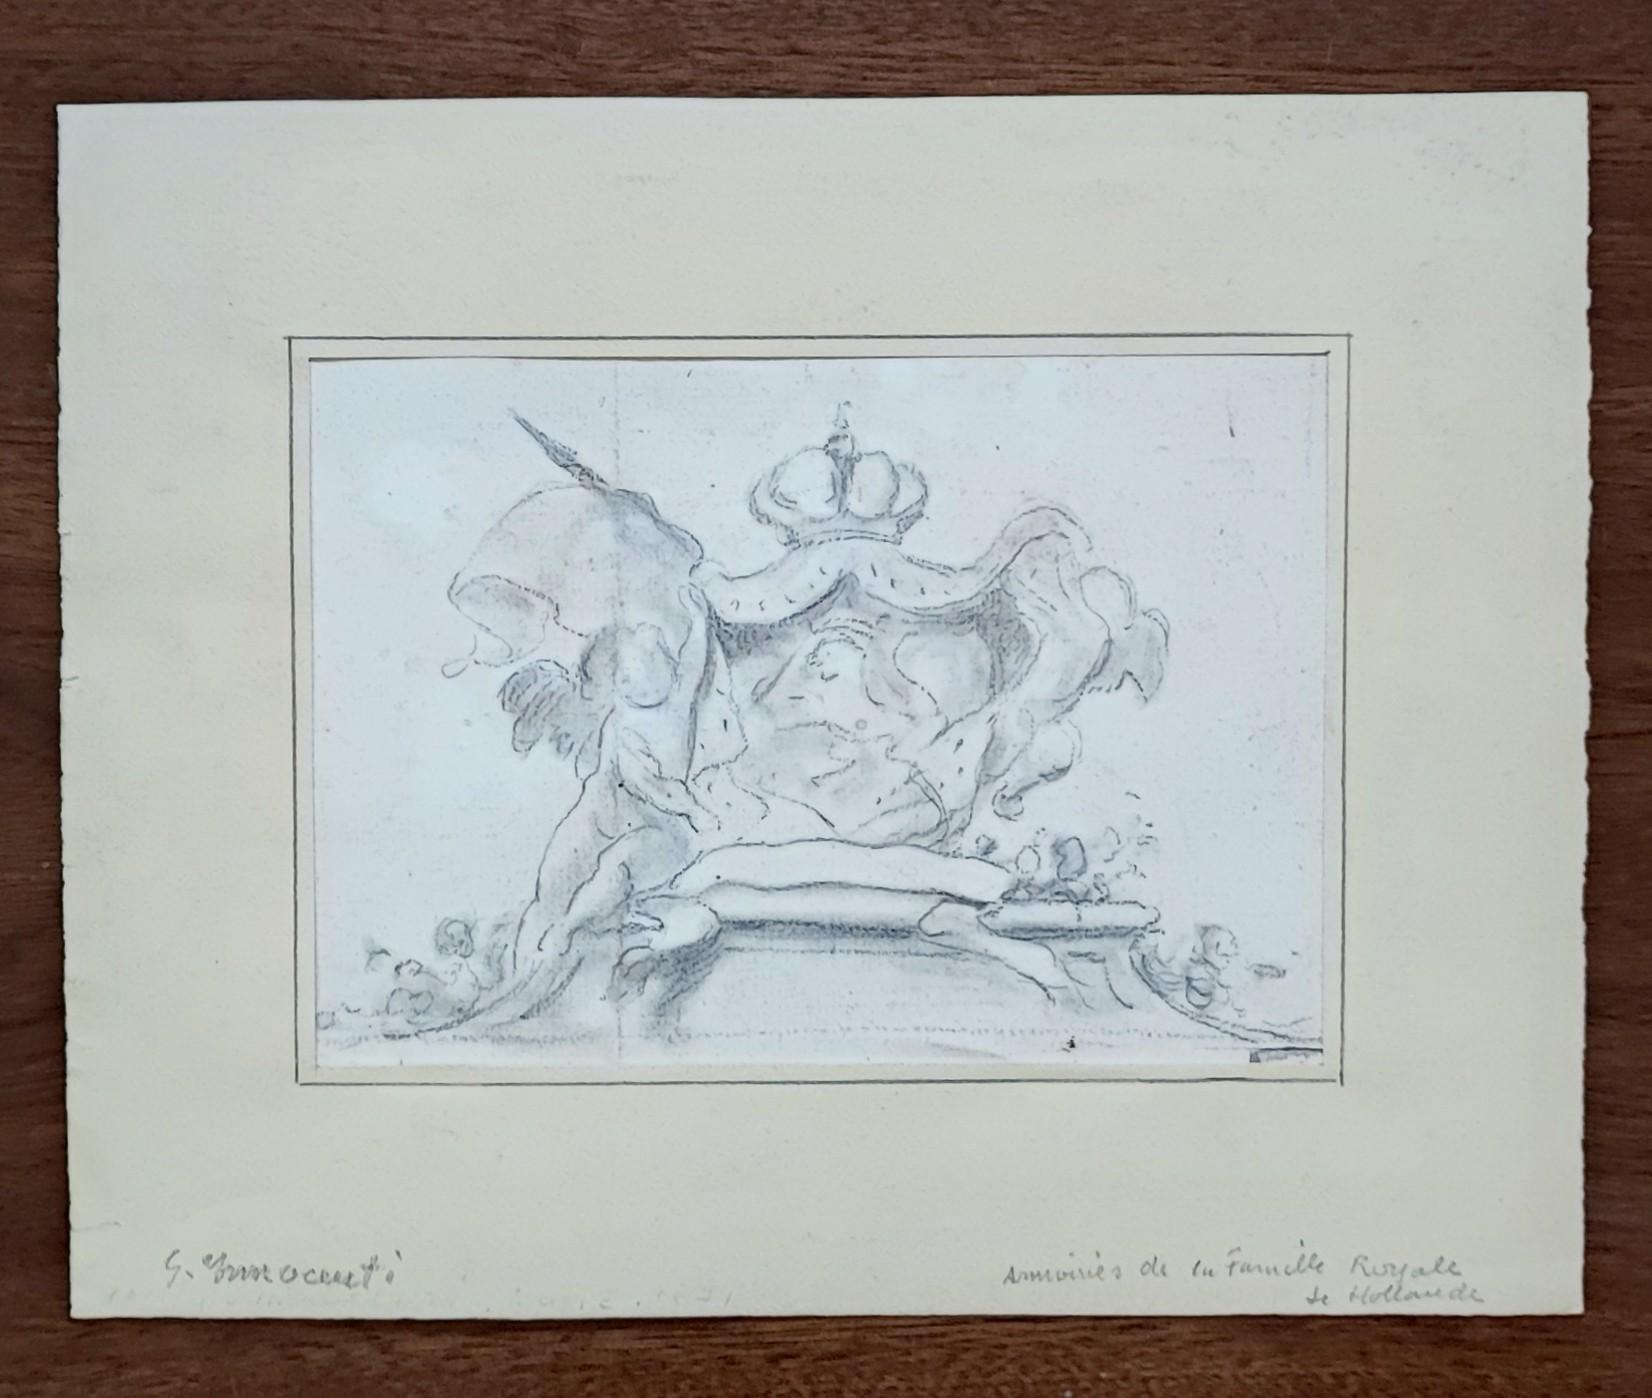 Sketch Coat of Arms of the Royal Family of Holland - Art by Guglielmo Innocenti